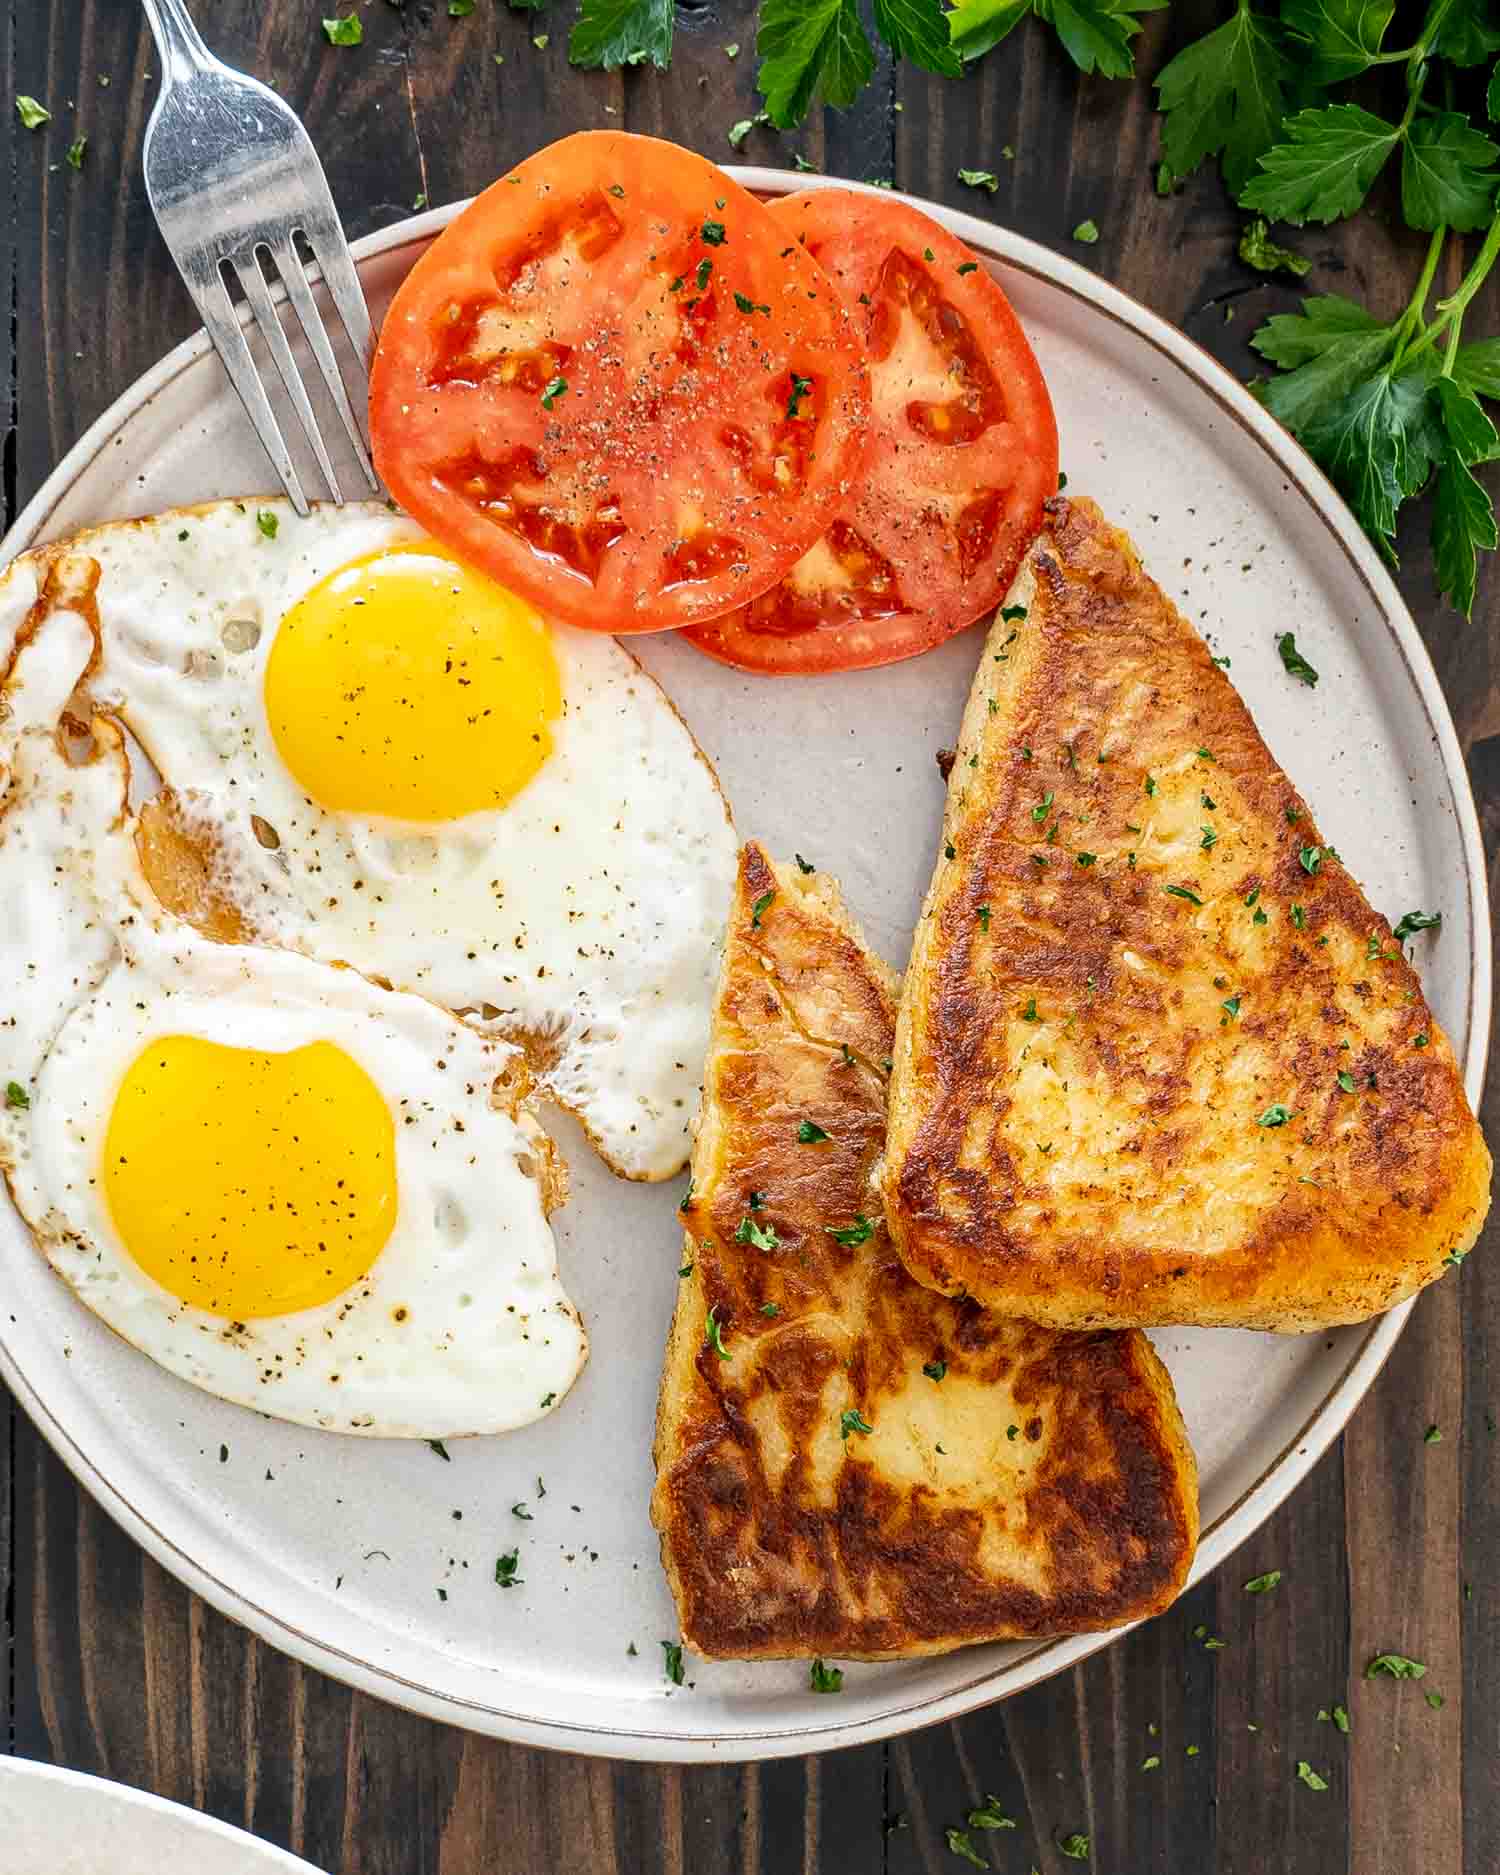 two irish potato cakes (potato farls) on a plate with sunny side up eggs and two tomato slices.